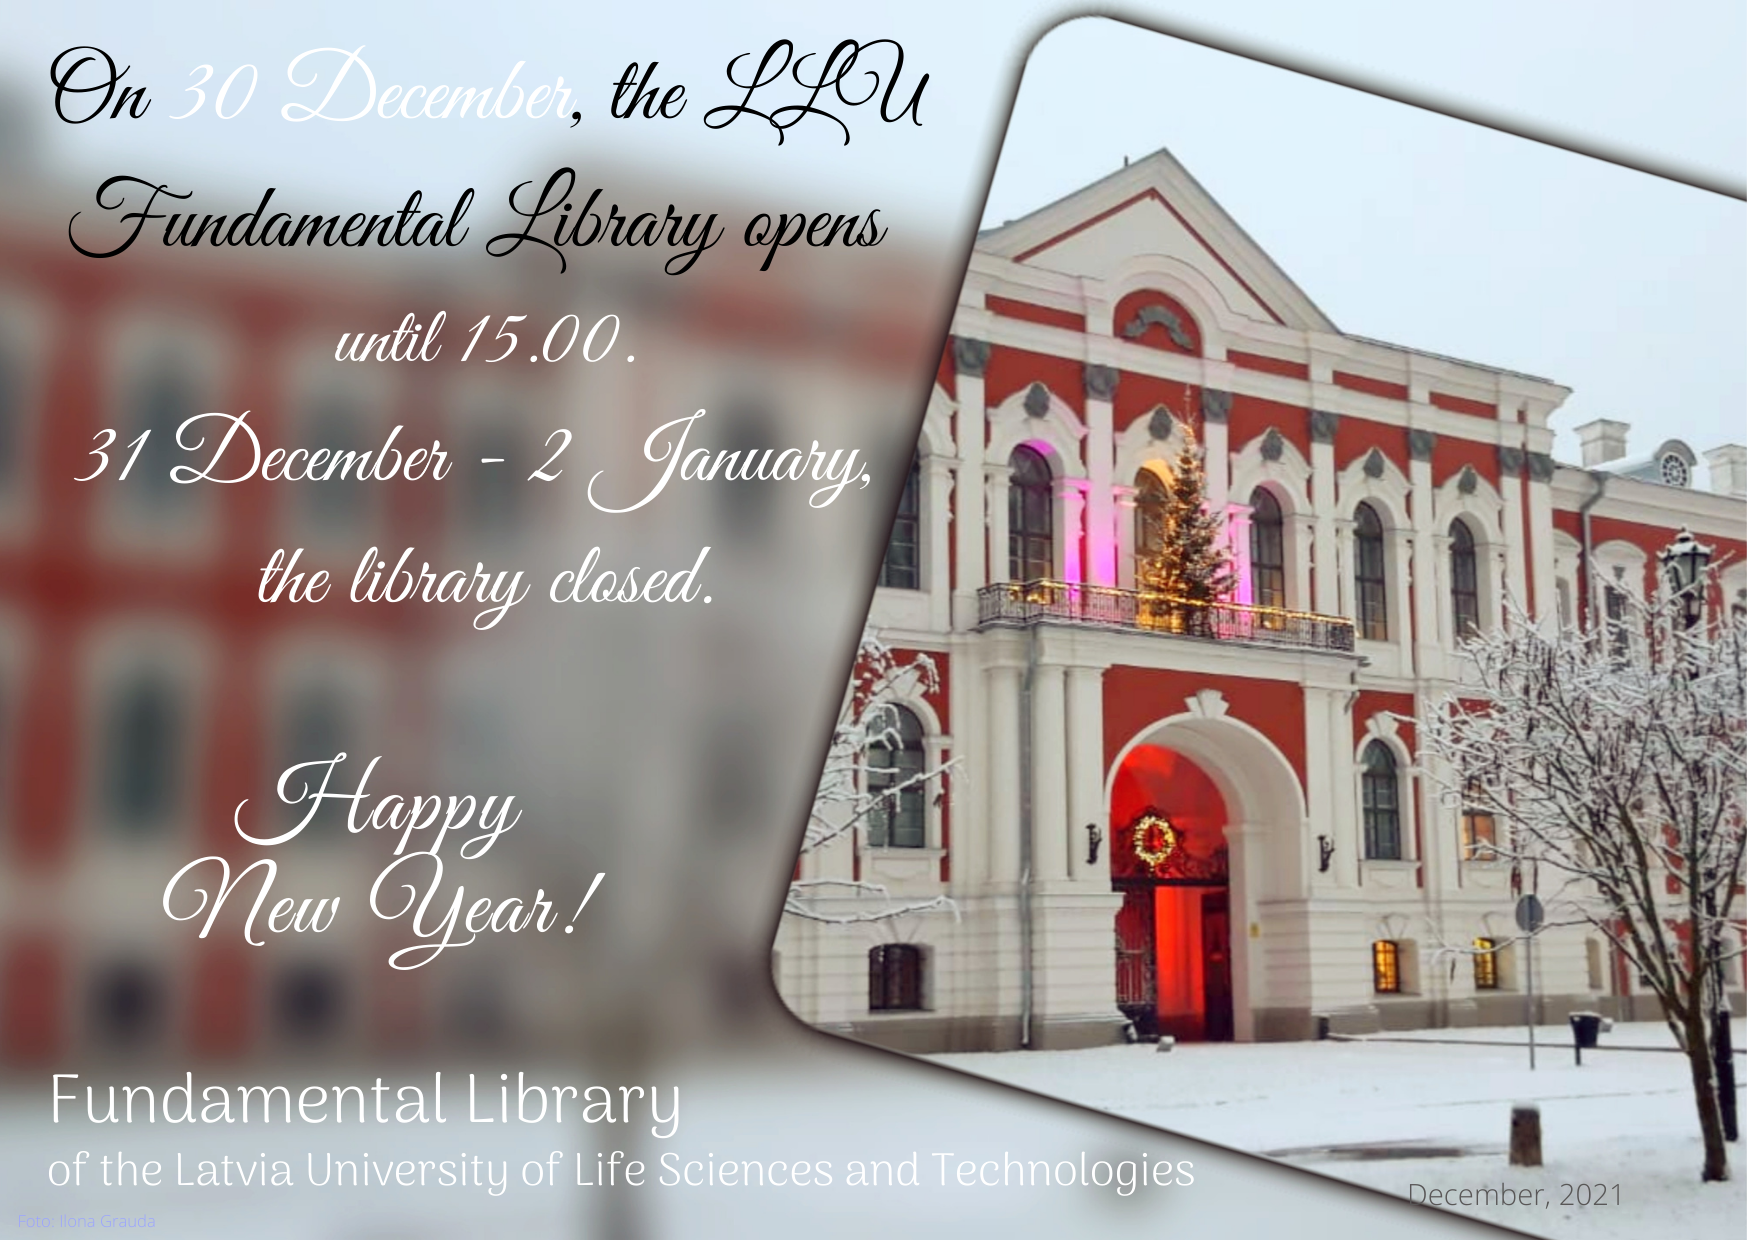 Library on Thursday 30 December working hours 9am-3pm. Happy New Year!